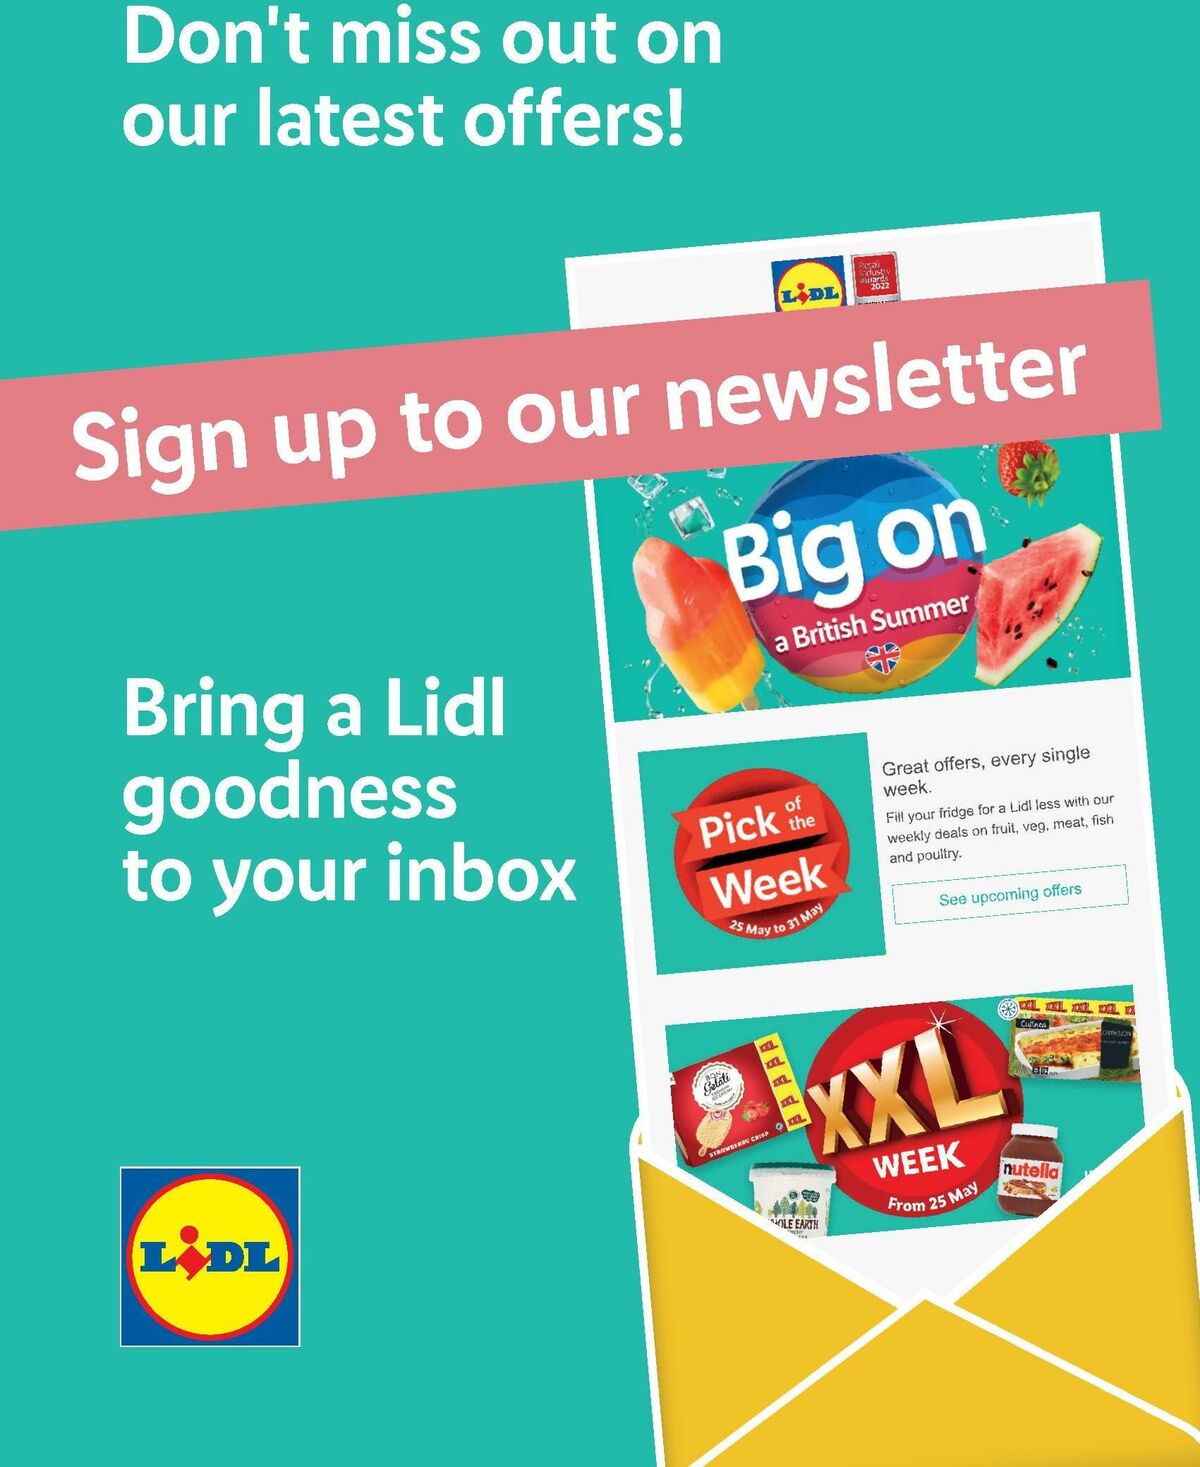 LIDL Offers from 13 July